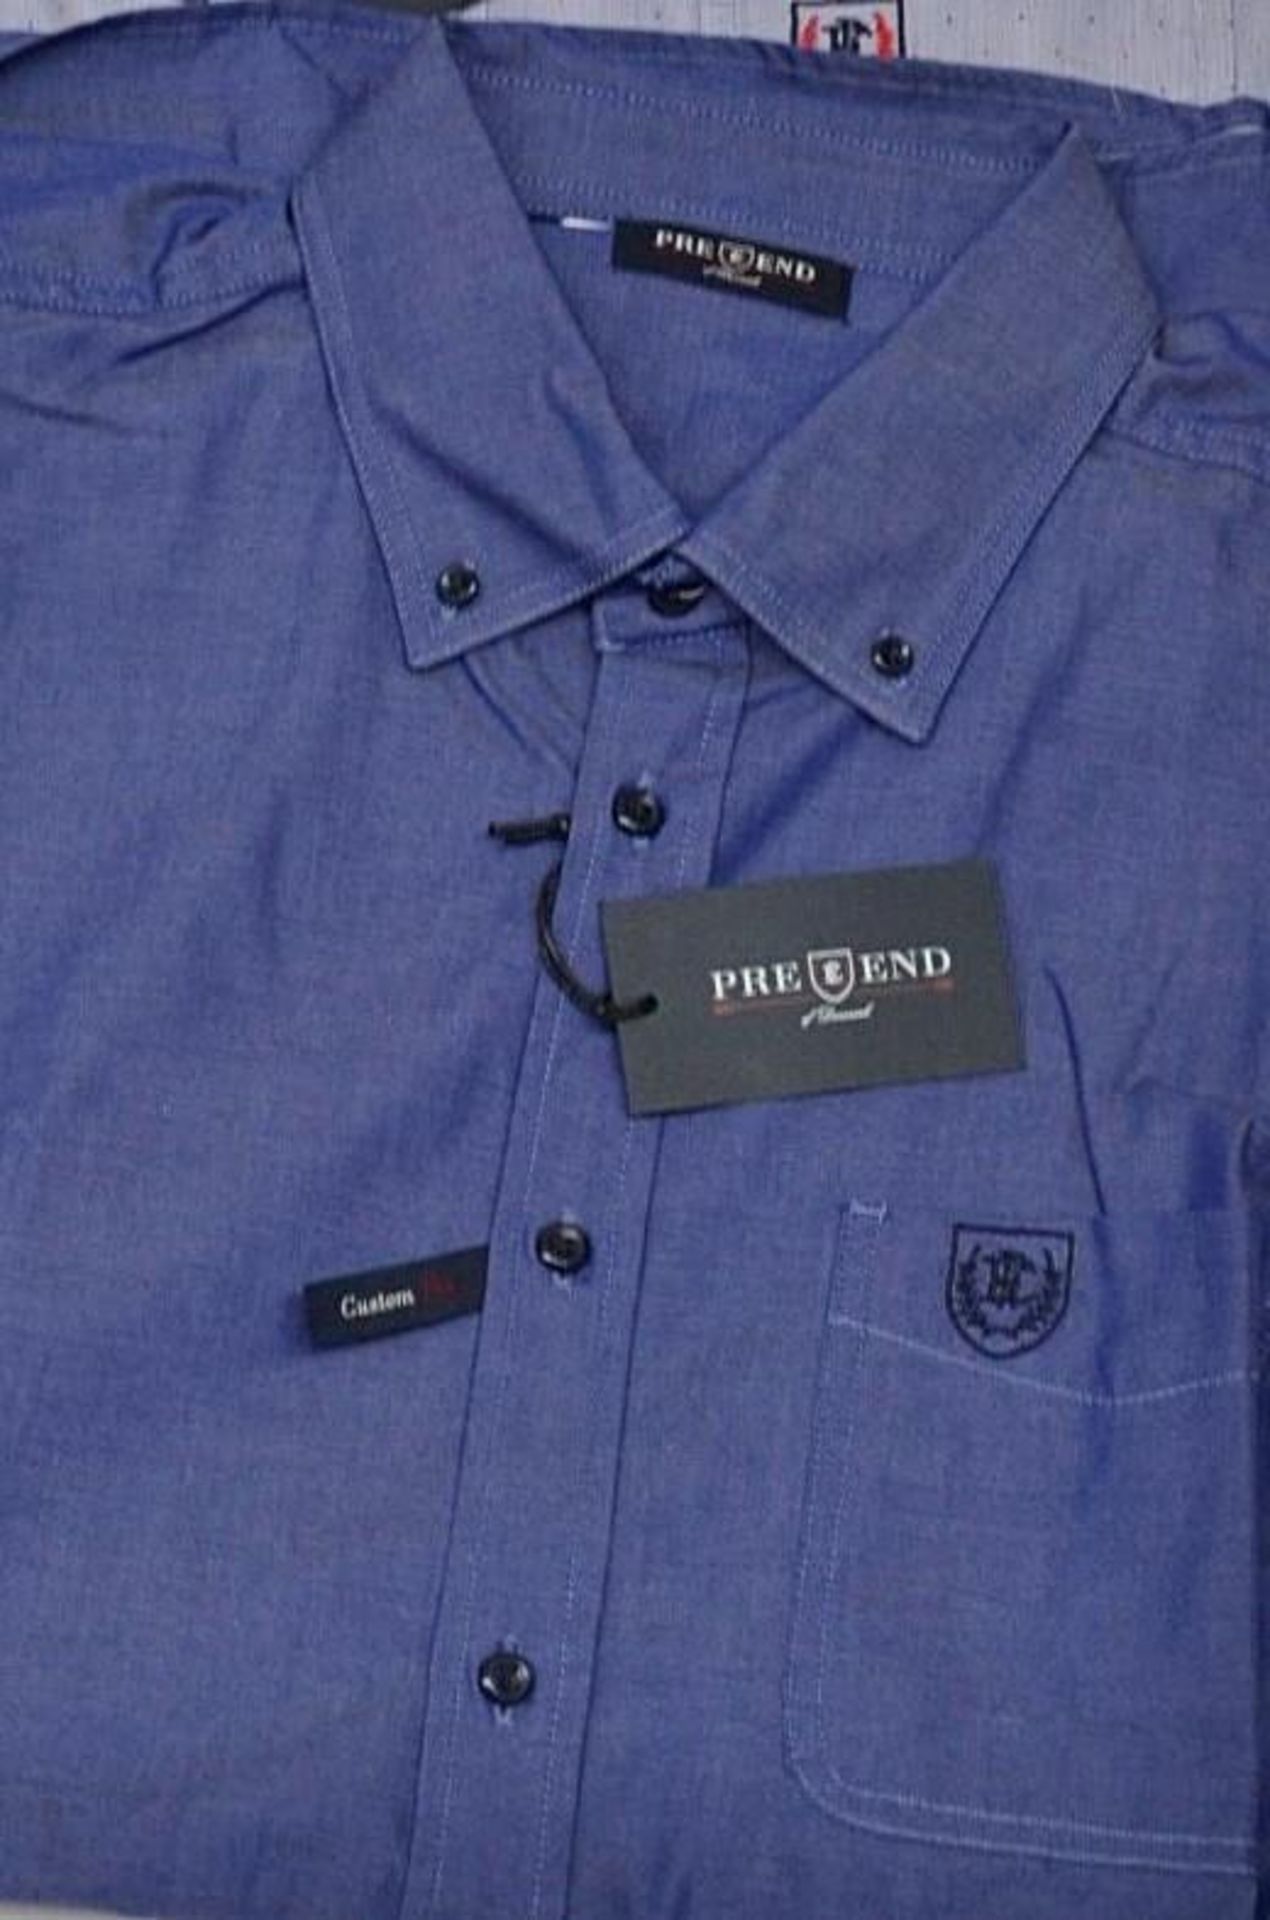 4 x Assorted Pre End Mens Shirts - Various Styles - Suitable For Evenings Out Or To Wear In The Offi - Image 6 of 6